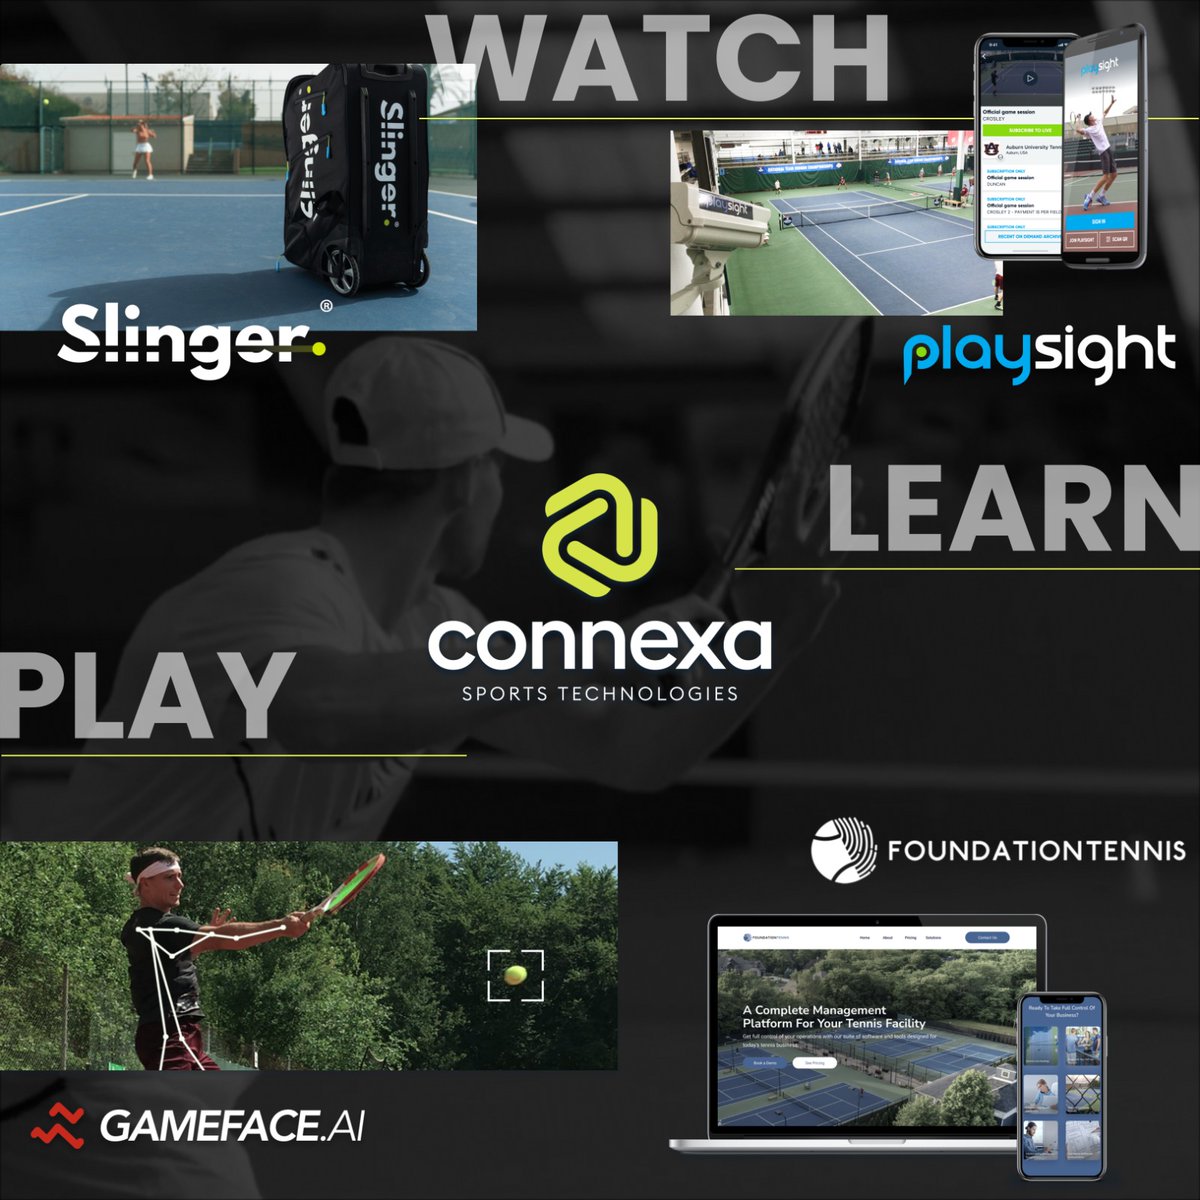 We are excited to announce the launch of @ConnexaSports, a connected sports company that brings together @SlingerBag, @PlaySight, @gamefaceai  and @Foundation10s 

Press Release: connexasports.com/news/?qmodStor…